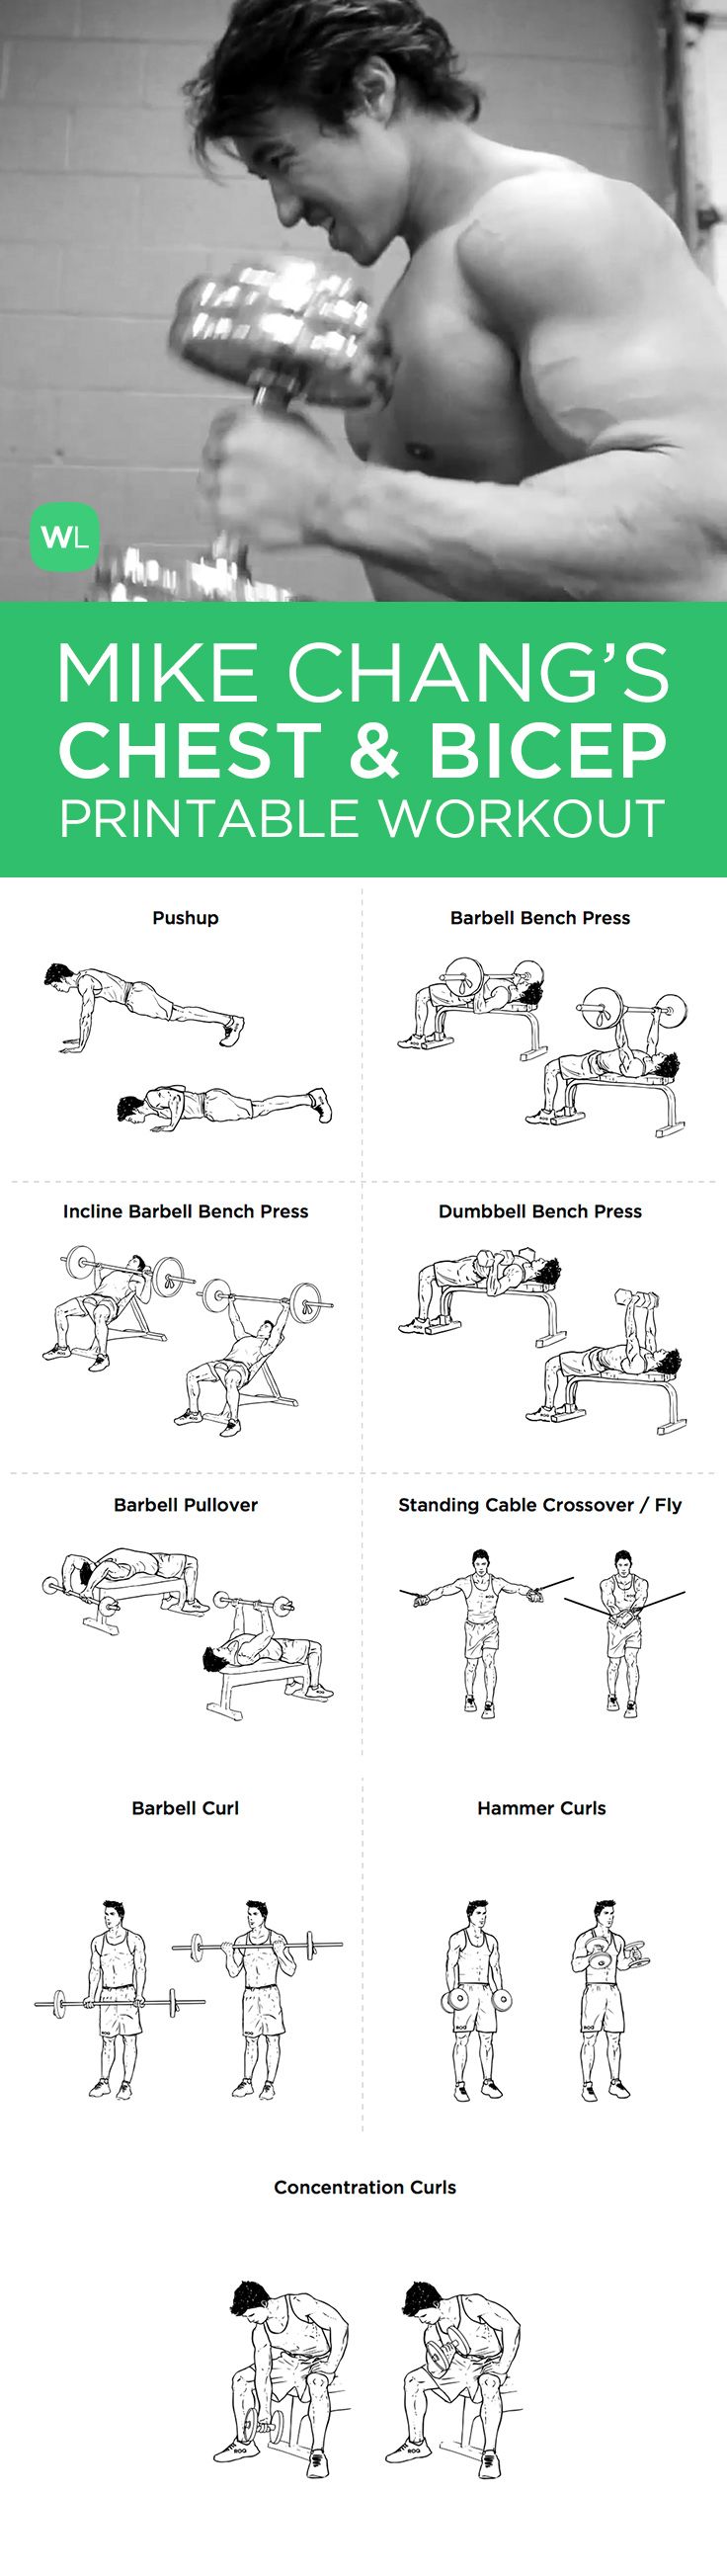 bullworker exercise chart pdf